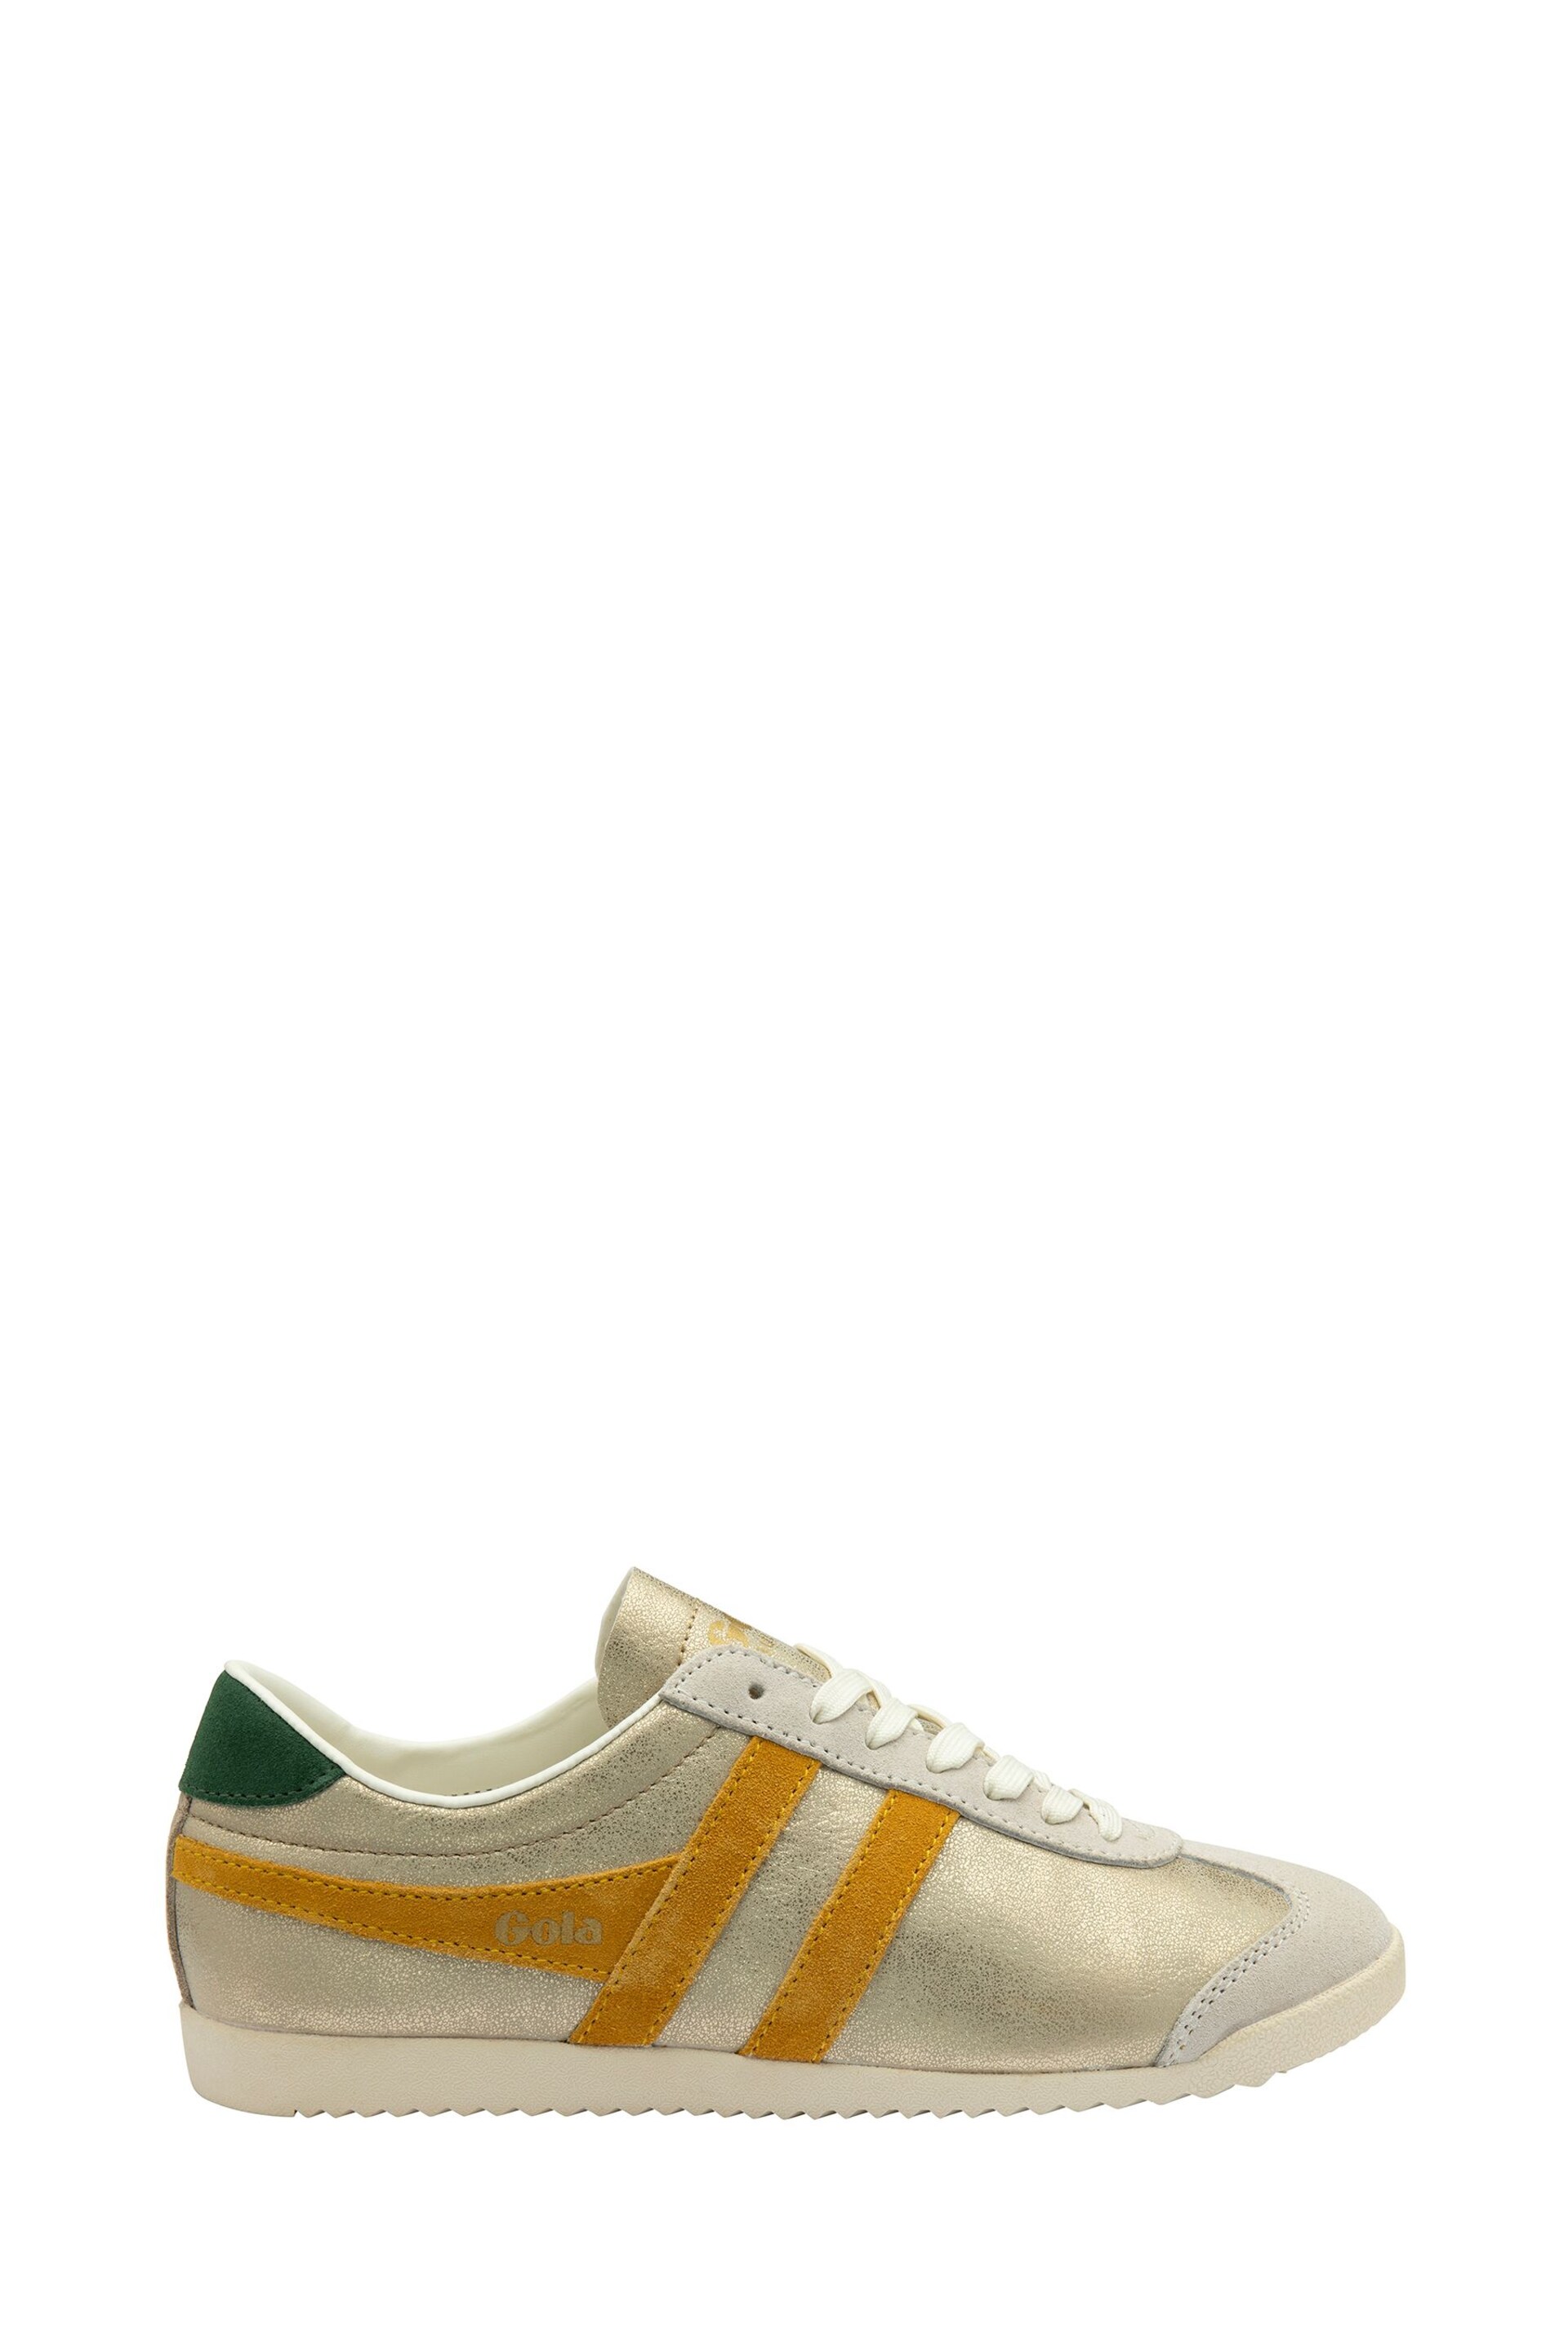 Gola Corn gold Ladies Bullet Blaze Lace Up Trainers - Image 1 of 4